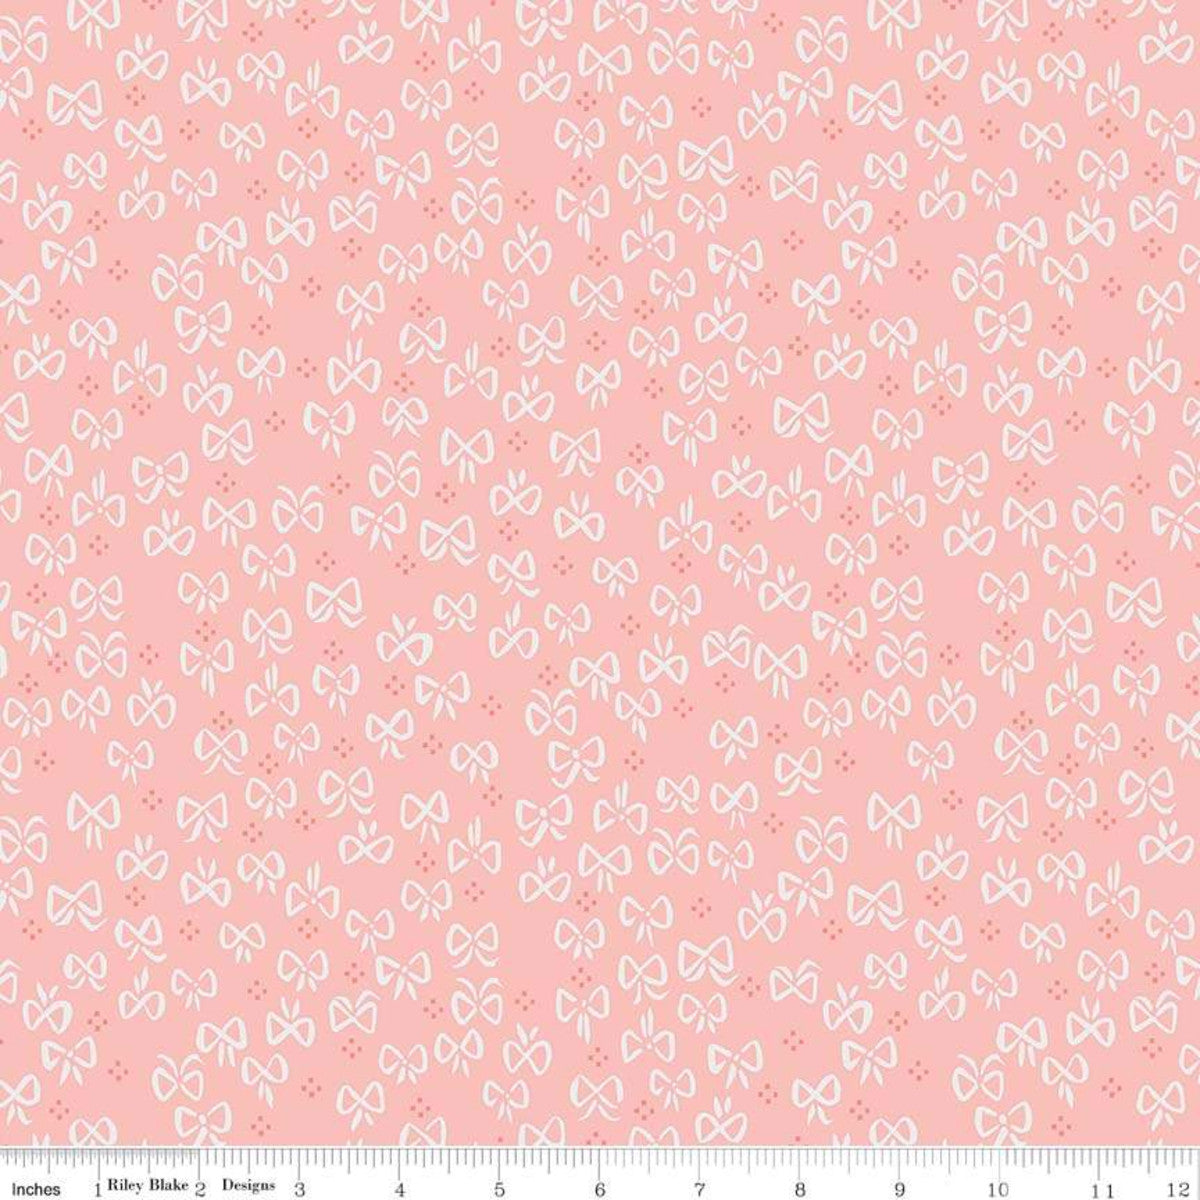 Red Riding Hood Bows Pink - Little Red In The Woods - Riley Blake Cotton Fabric ✂️ LAST ONE